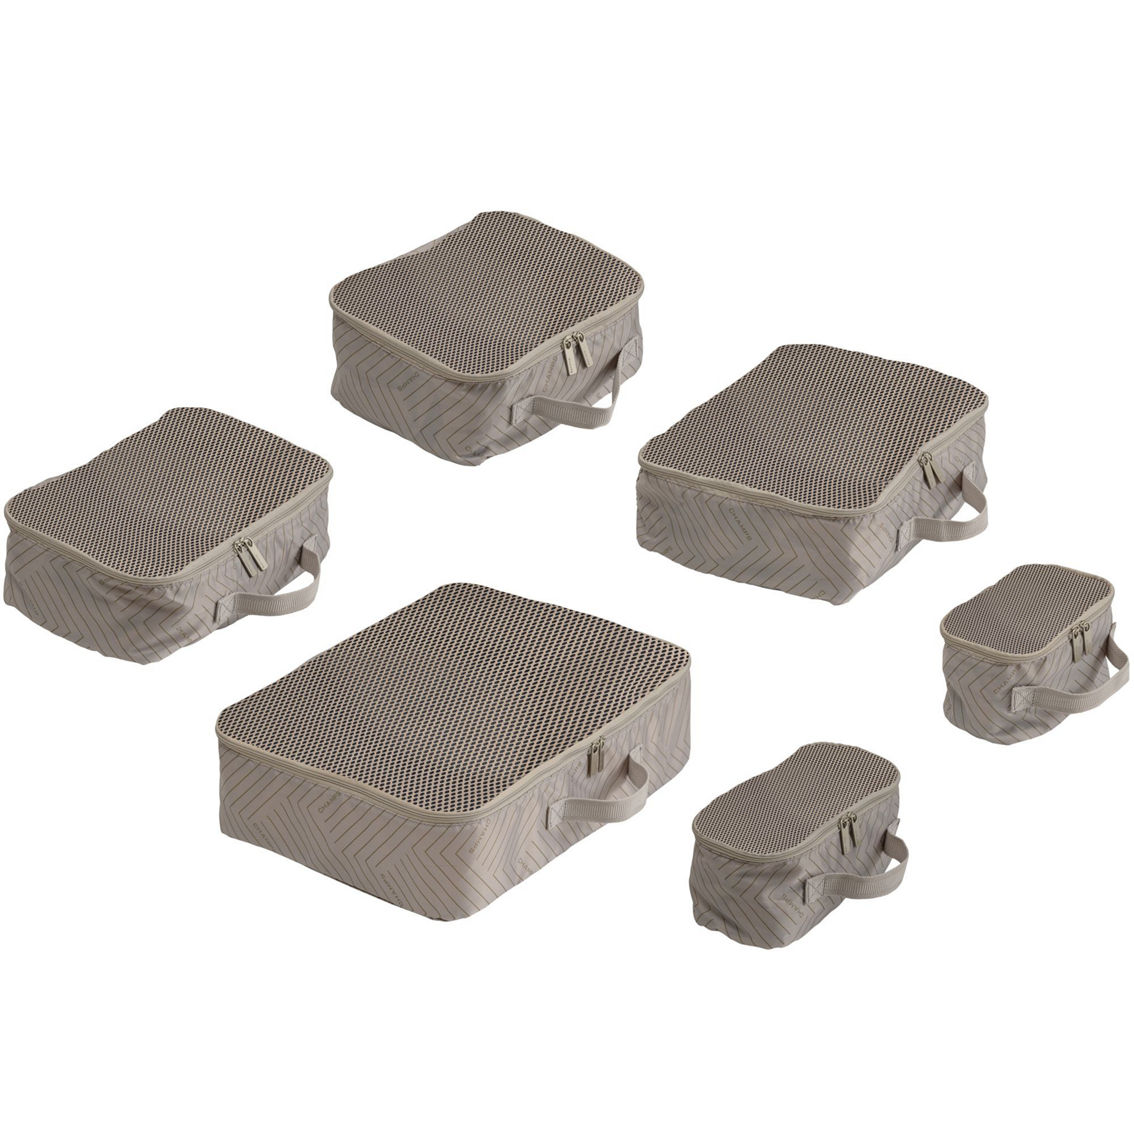 CHAMPS Packing Cubes-6 Piece Set - Image 2 of 5